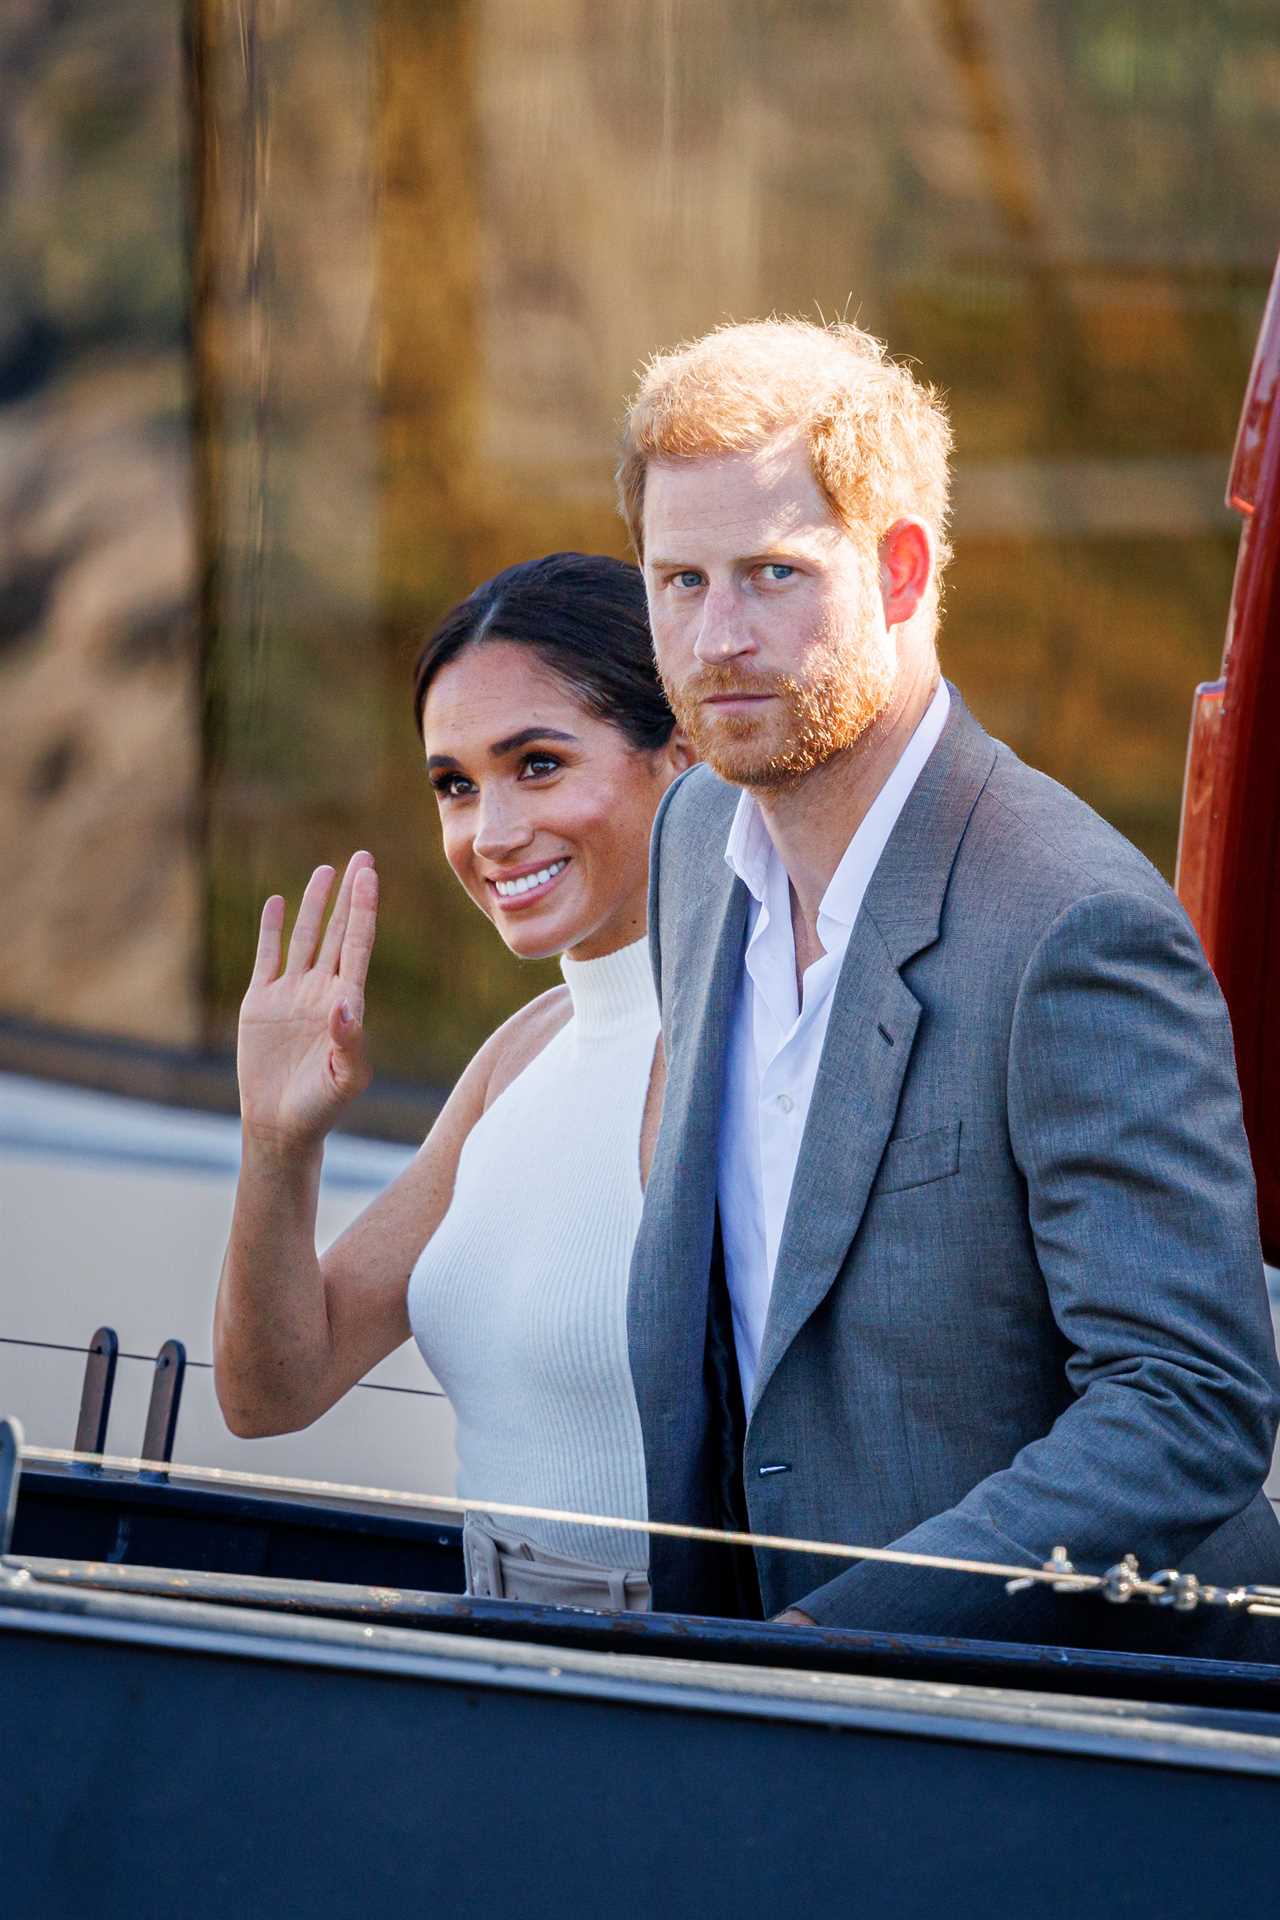 DUSSELDORF, GERMANY - SEPTEMBER 06: Prince Harry, Duke of Sussex and Meghan, Duchess of Sussex after a boat trip during the Invictus Games Dusseldorf 2023 - One Year To Go events on September 6, 2022 in Dusseldorf, Germany. The Invictus Games will be held in Germany for the first time in September 2023. (Photo by Patrick van Katwijk/Getty Images)